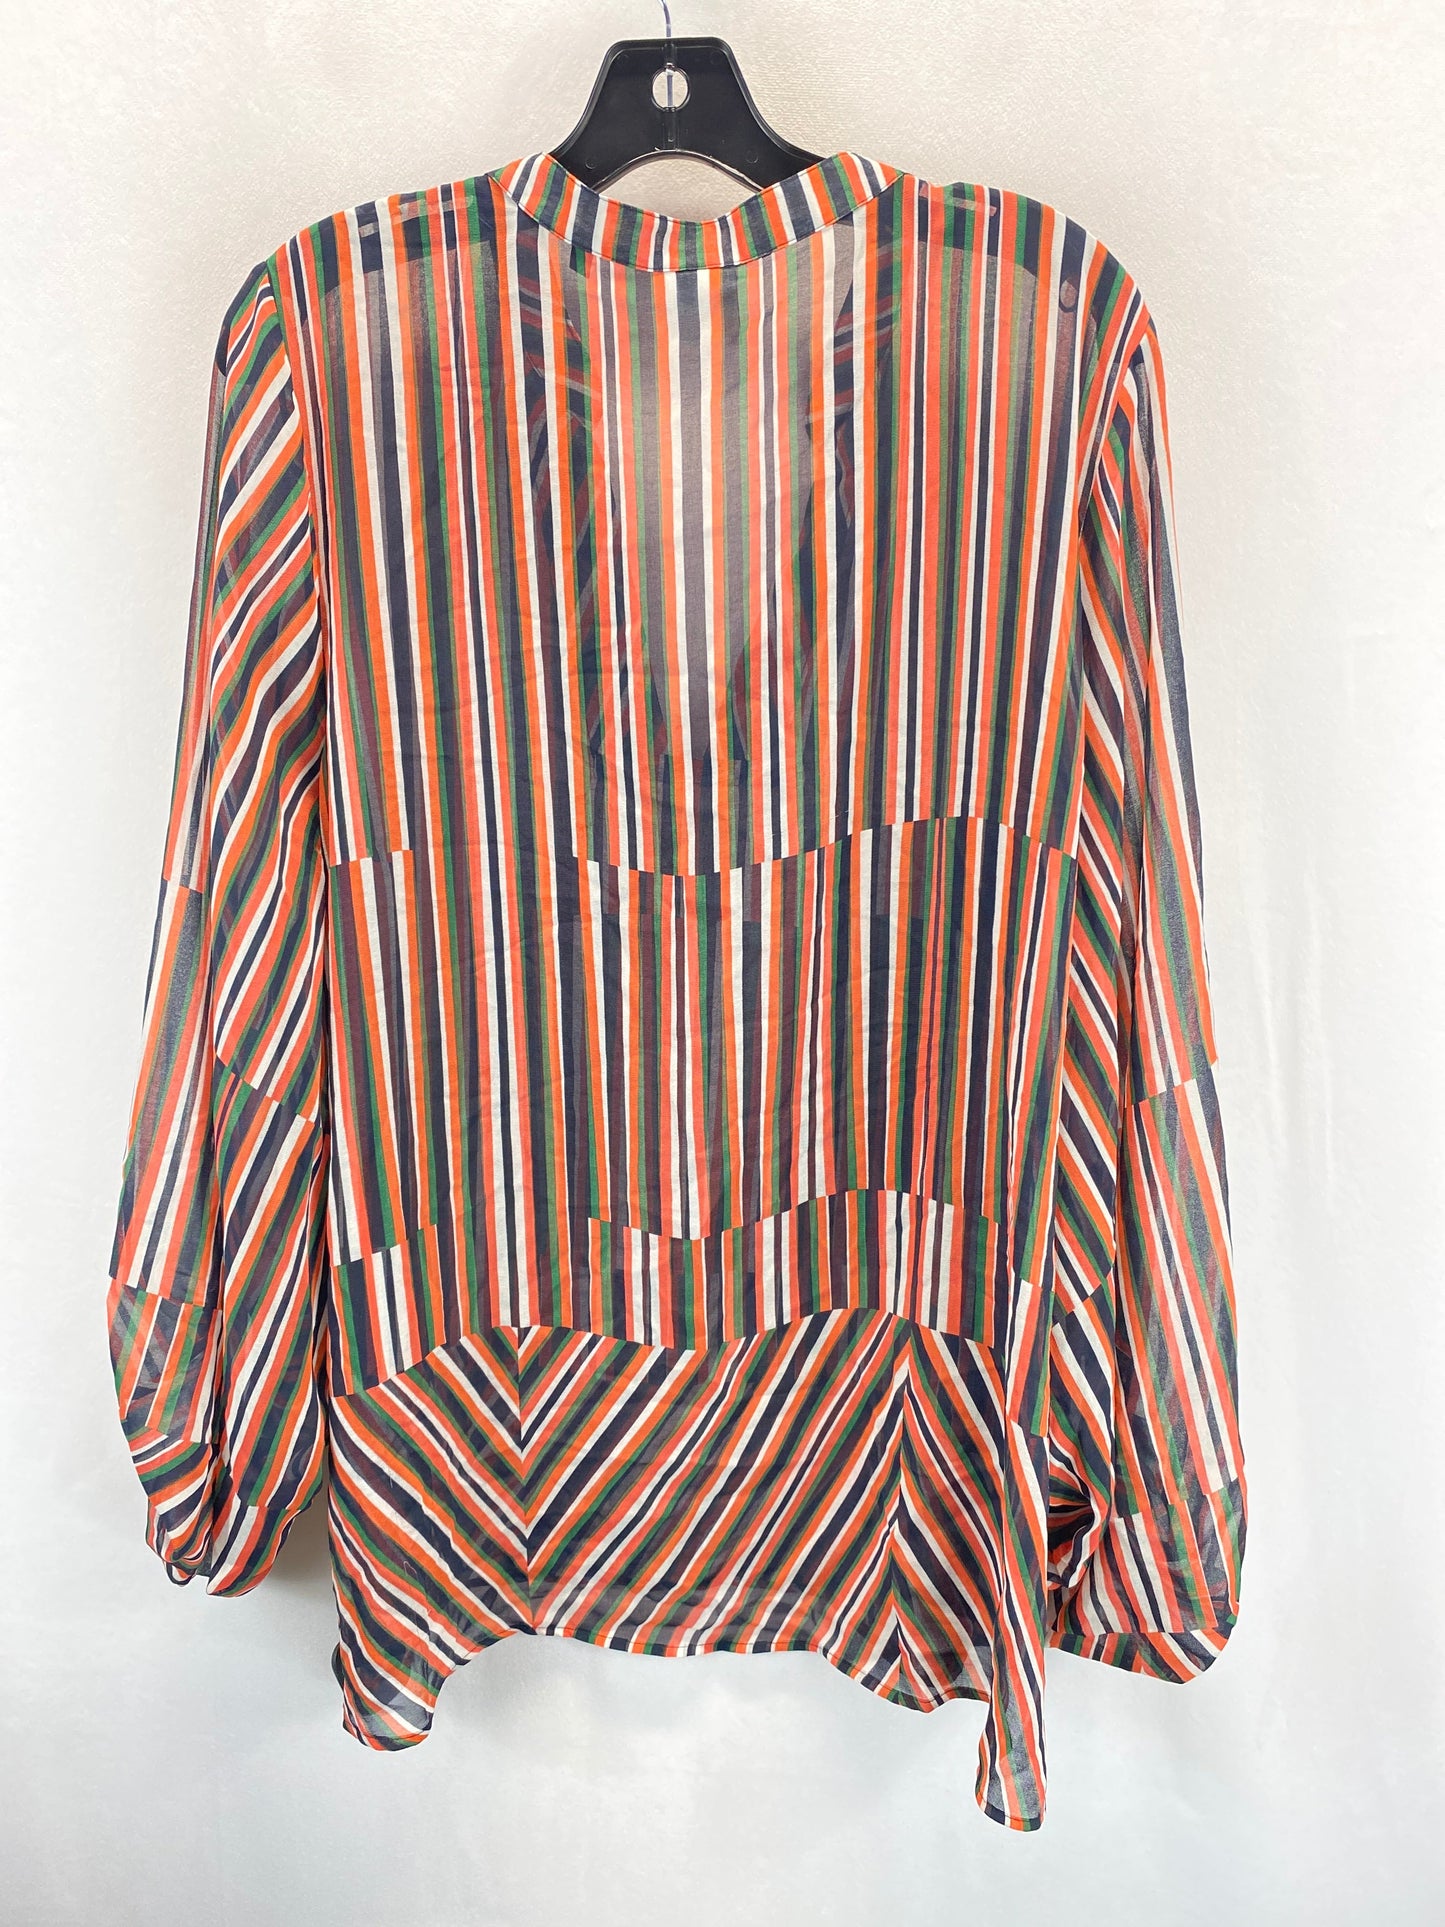 Striped Pattern Top Long Sleeve Cabi, Size Xl